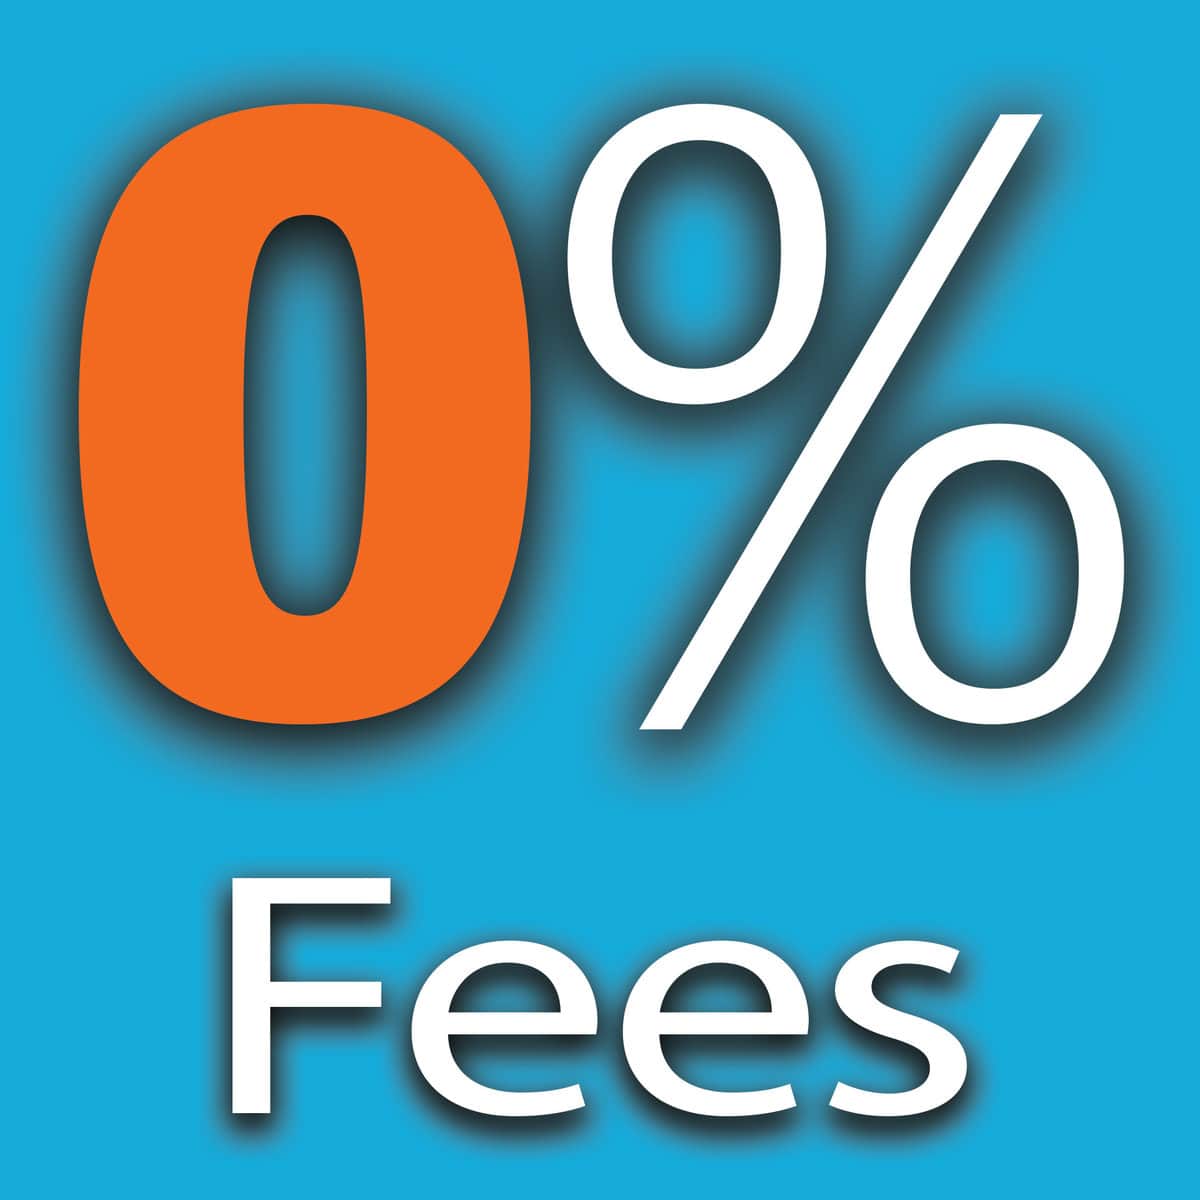 We offer 0% Credit Card Processing Fees